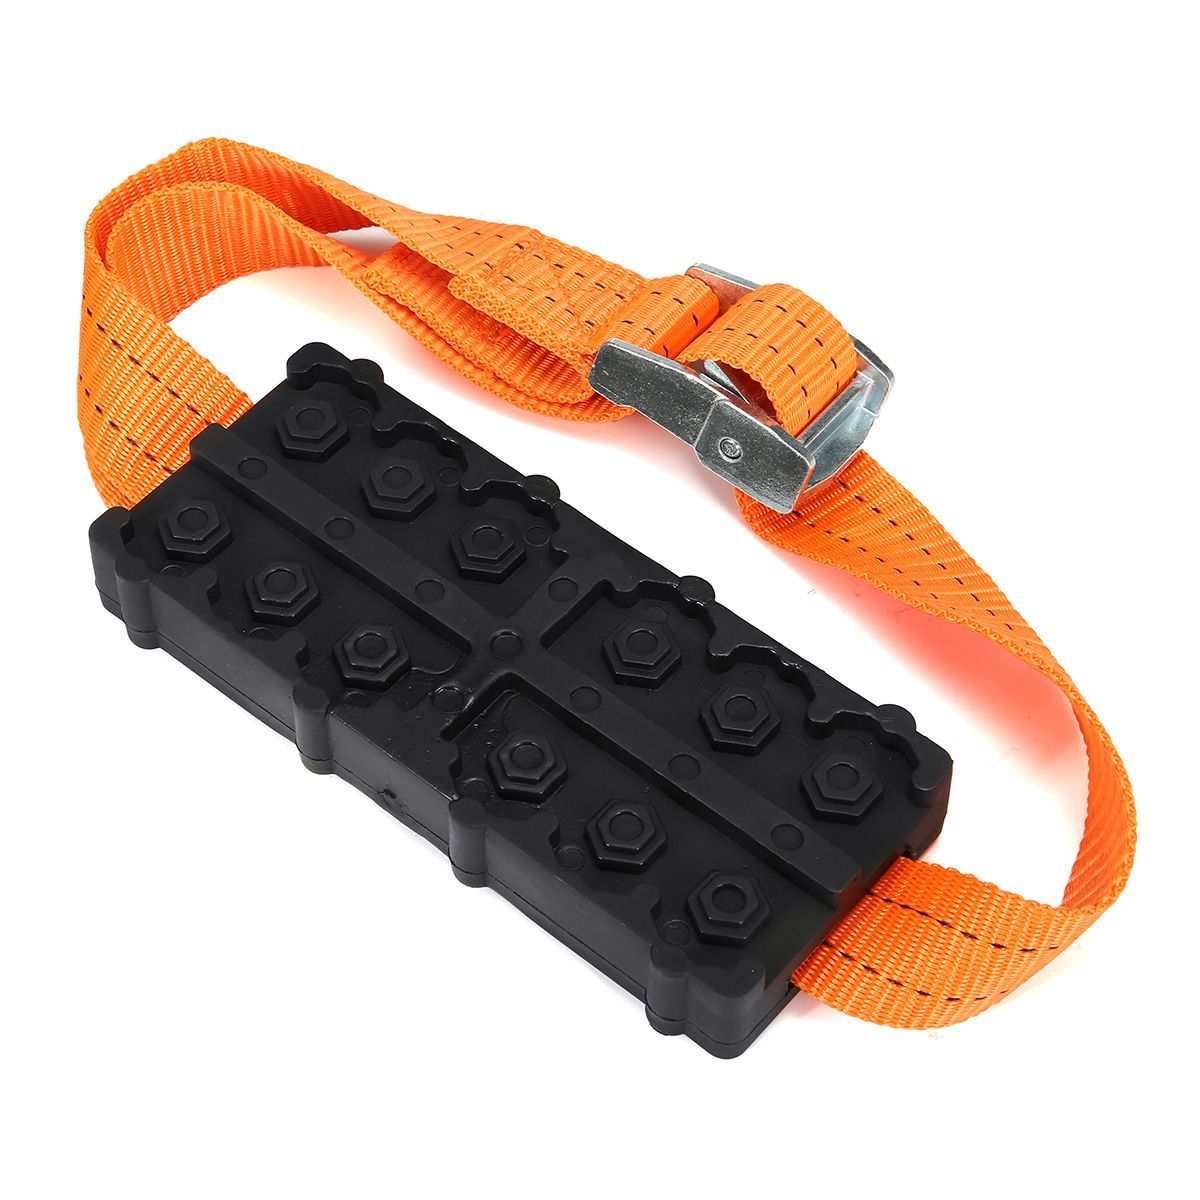 Rubber-Winter-Emergency-Car-Snow-Chain-Truck-SUV-Wheel-Tire-Anti-skid-Block-Safety-Driving-for-Mud-S-1395414